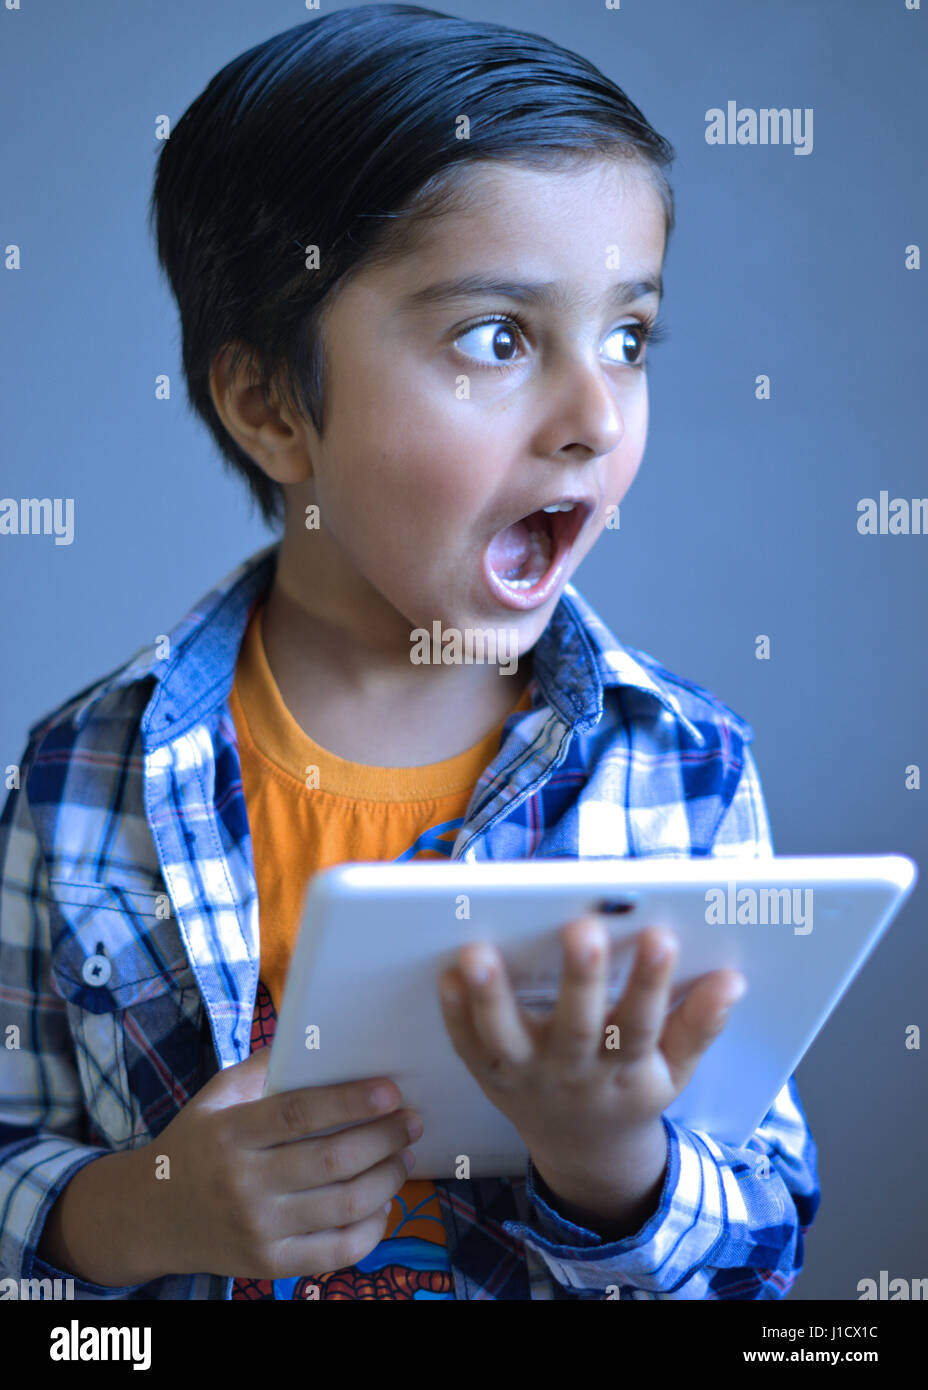 Kid with surprised look holding a tablet computer, looking away from the camera lens. Stock Photo